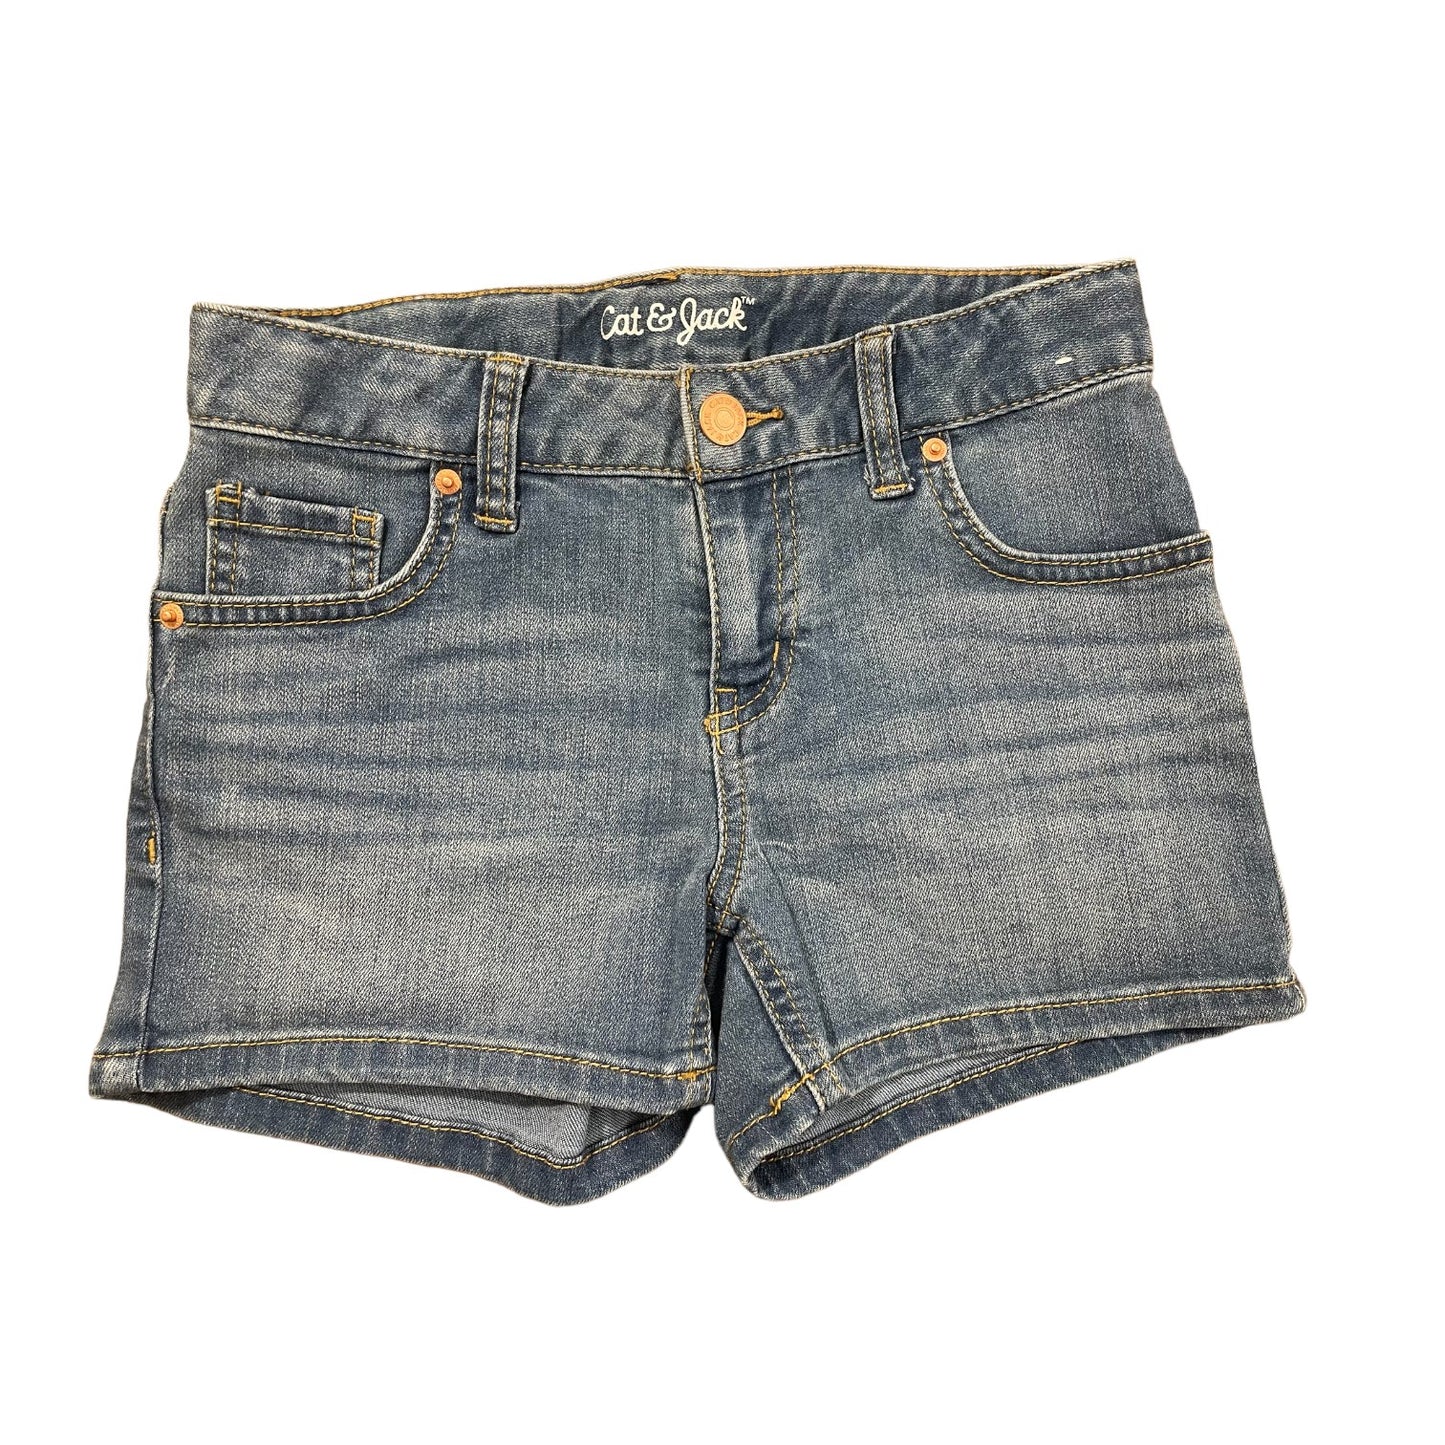 Cat and Jack Girls Jean Shorts